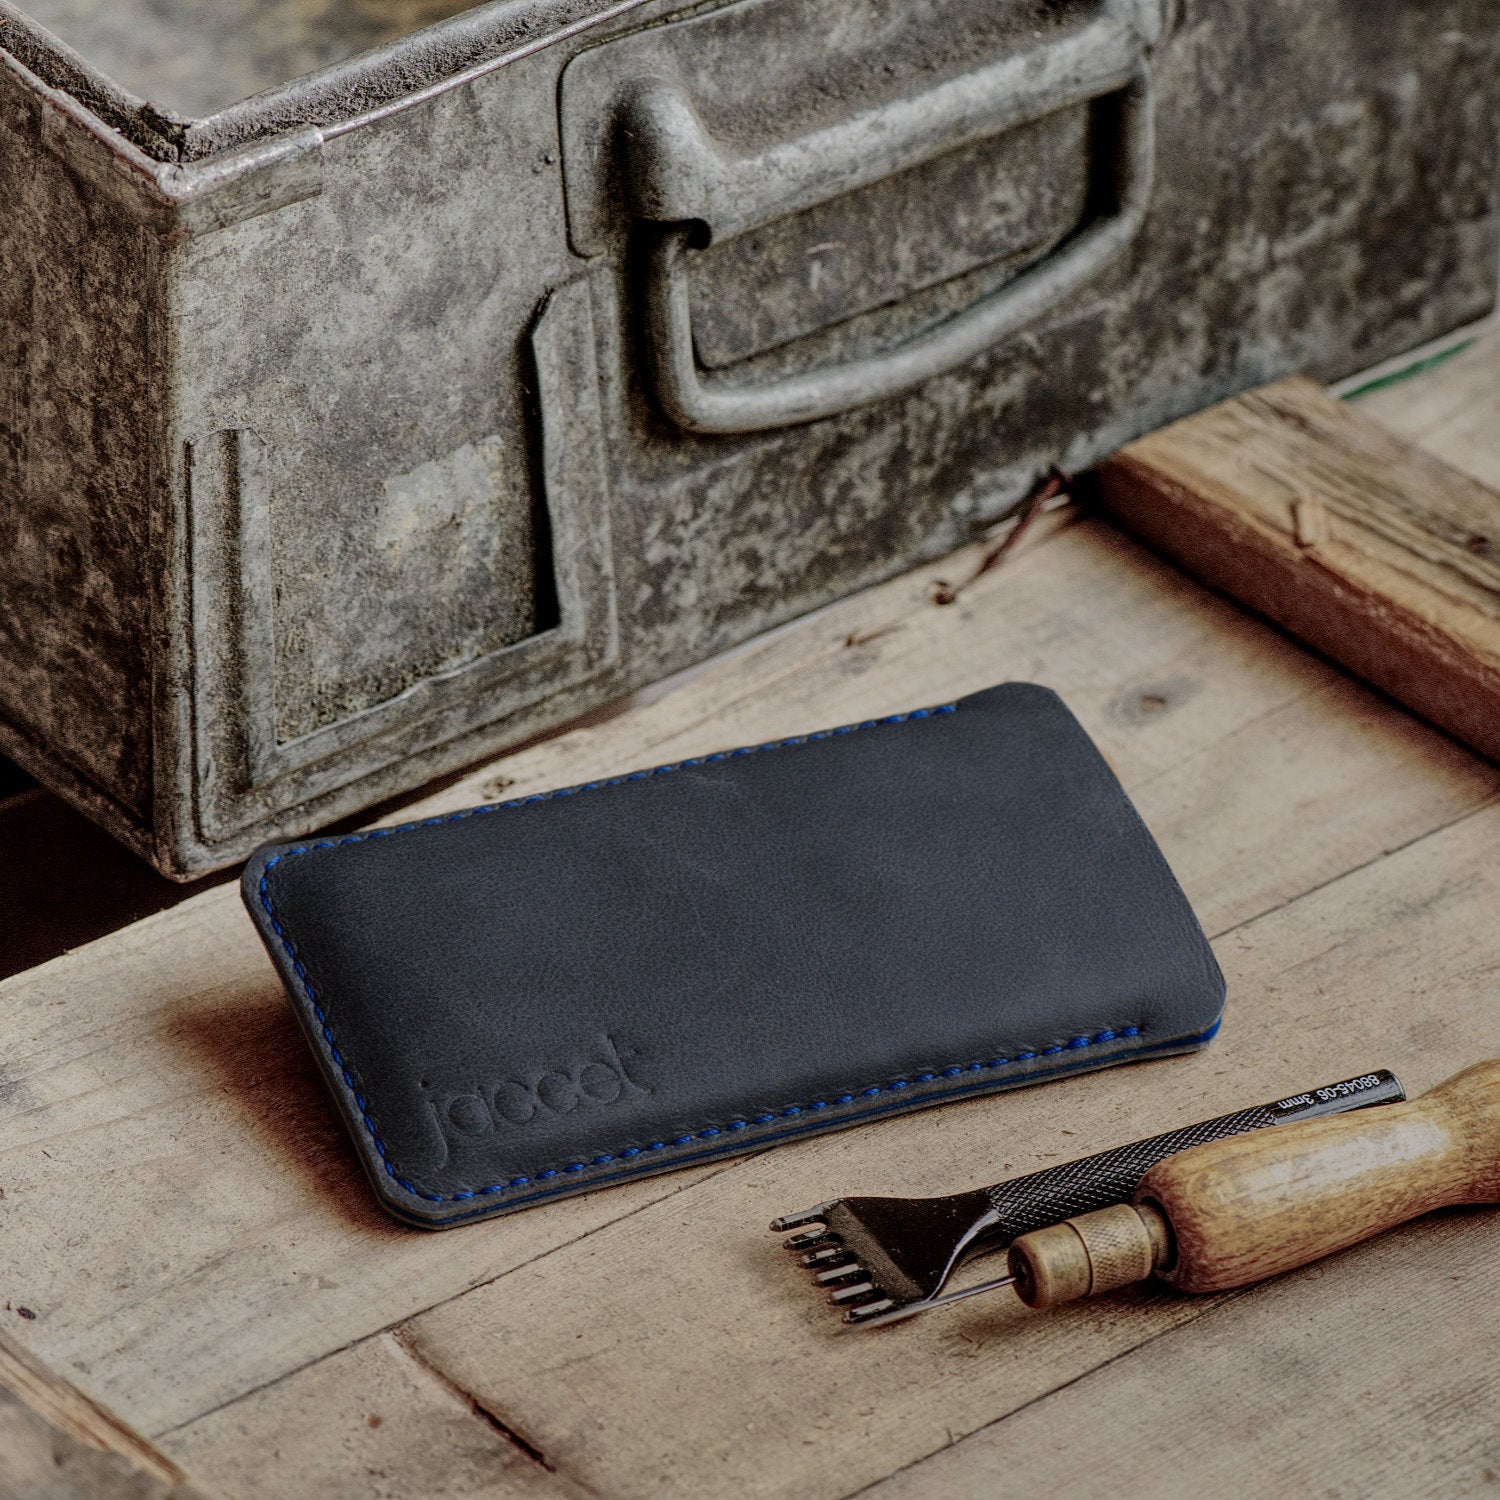 JACCET leather iPhone sleeve - anthracite/black leather with blue wool felt. 100% Handmade